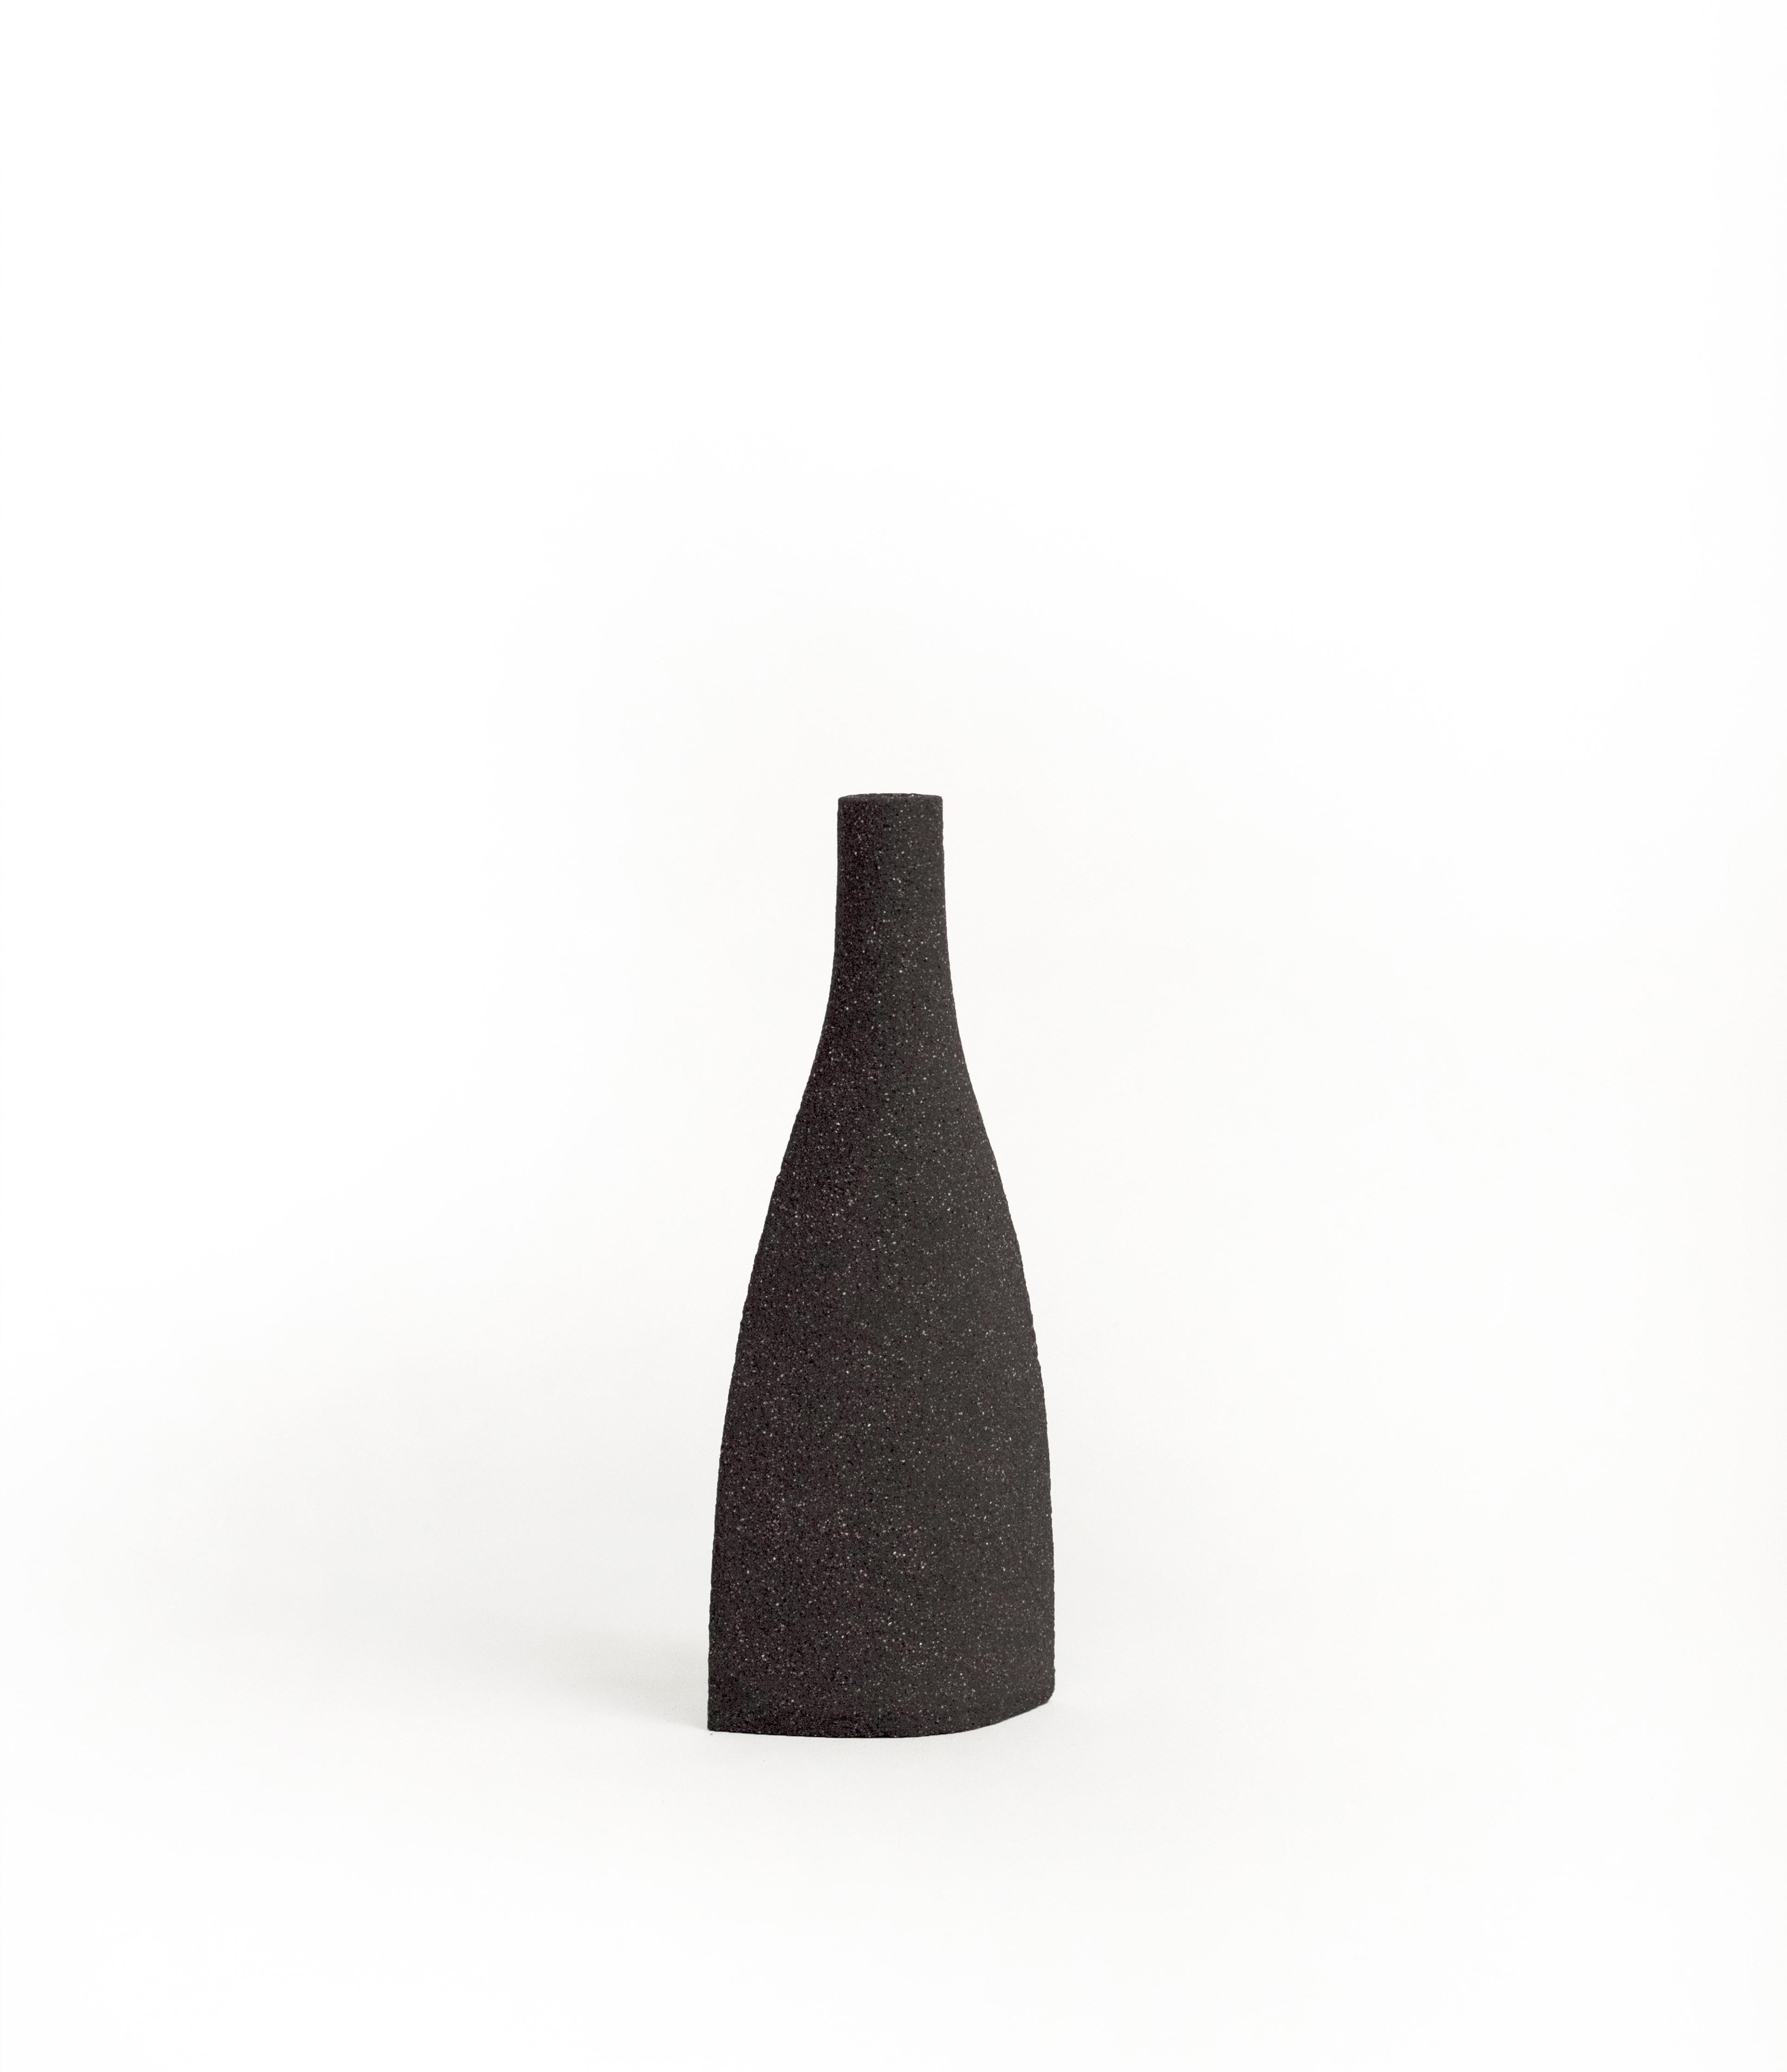 Bouteille [s] - black

Hand-crafted in our studio in France.

Measures: H: 21 CM / L: 8 CM
H: 11 INCH. / L: 4 INCH.

- Stoneware fired at high temperature finished with transparent glossy glaze inside.
- Raw exterior showcasing the natural